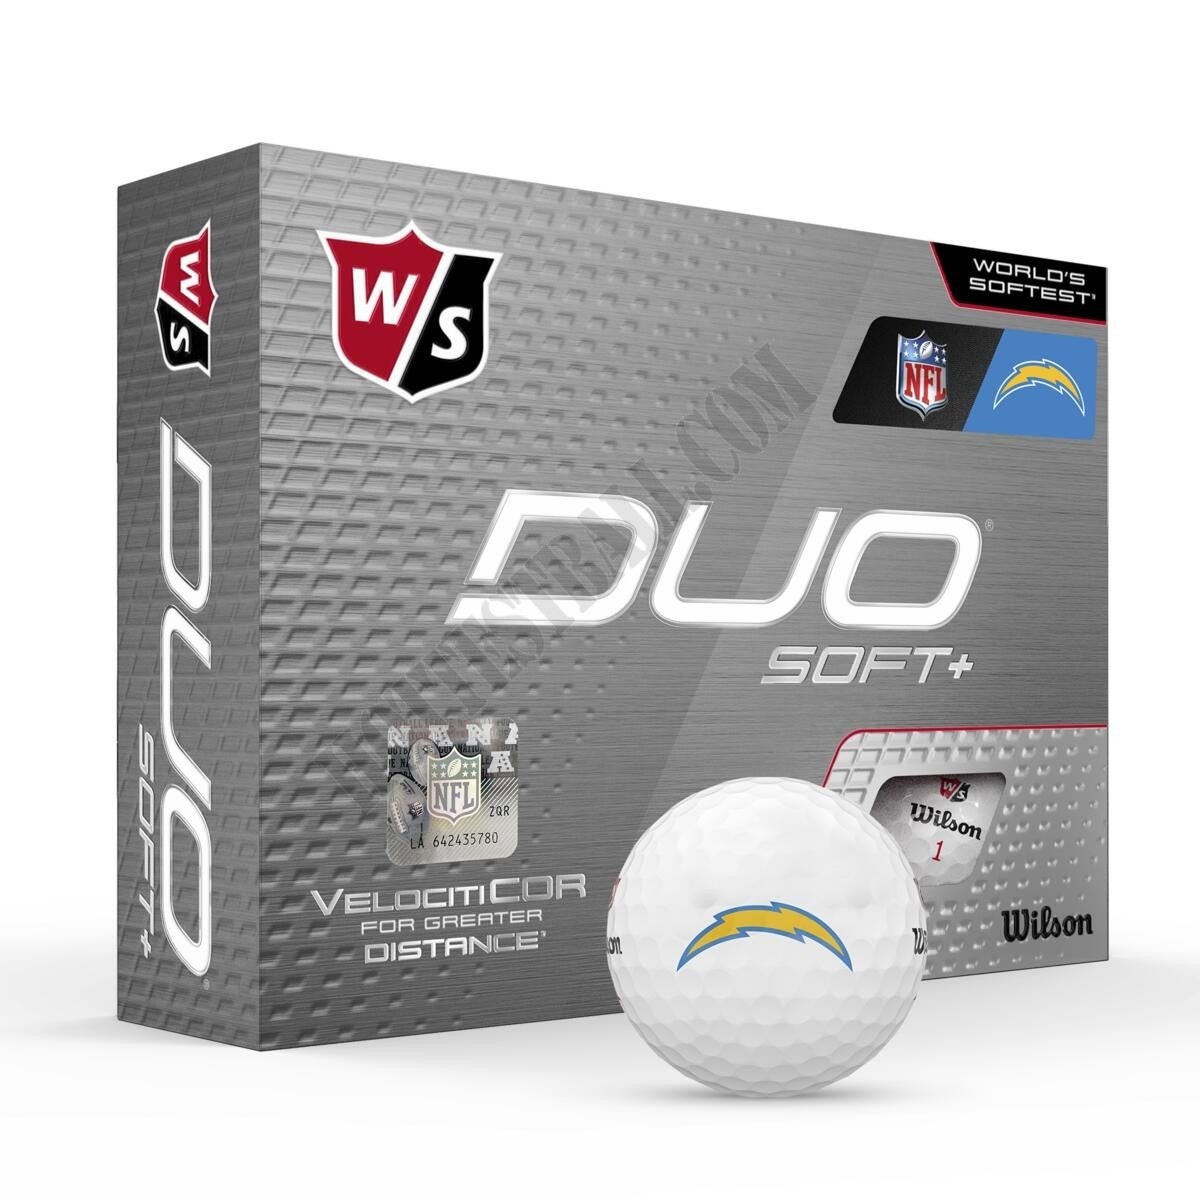 Duo Soft+ NFL Golf Balls - Los Angeles Chargers - Wilson Discount Store - -0